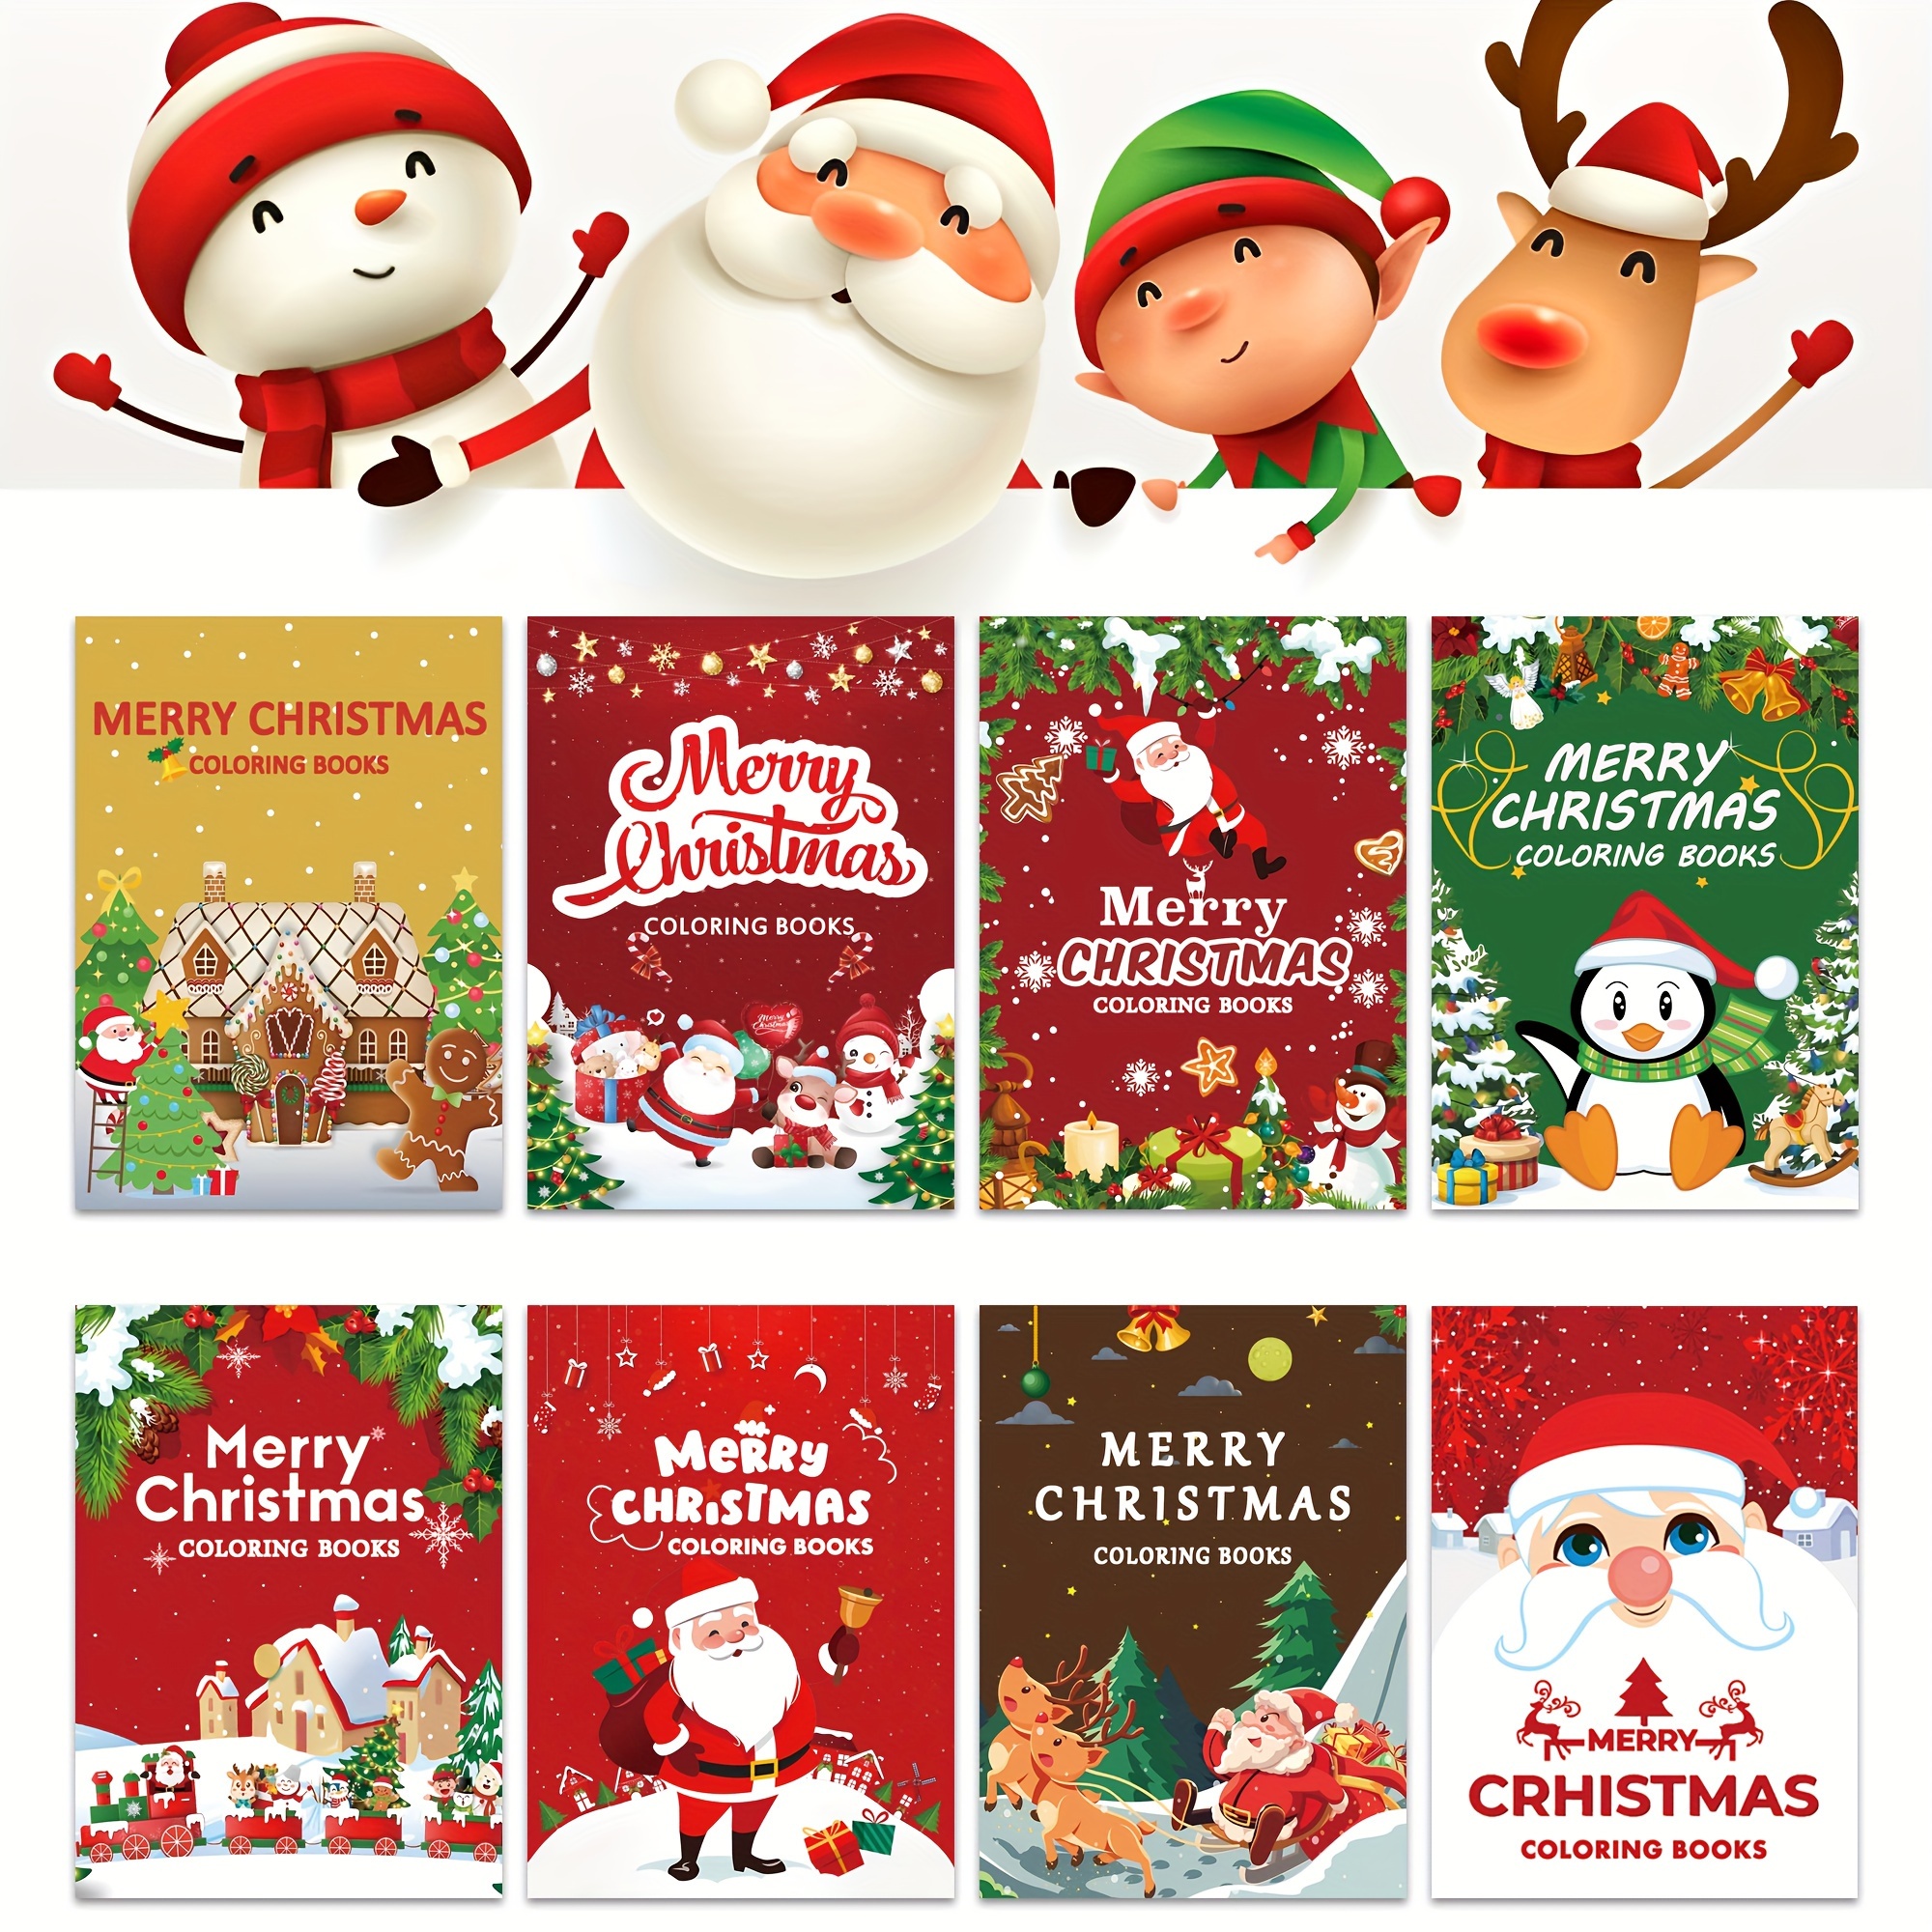 Christmas Decorations Coloring Books Kids Party Favors Xmas Stockings  Goodie Bags Stuffer Fun Holiday Supplies Drop Ediblesbag Am3Vy6781169 From  China Dvd, $0.46